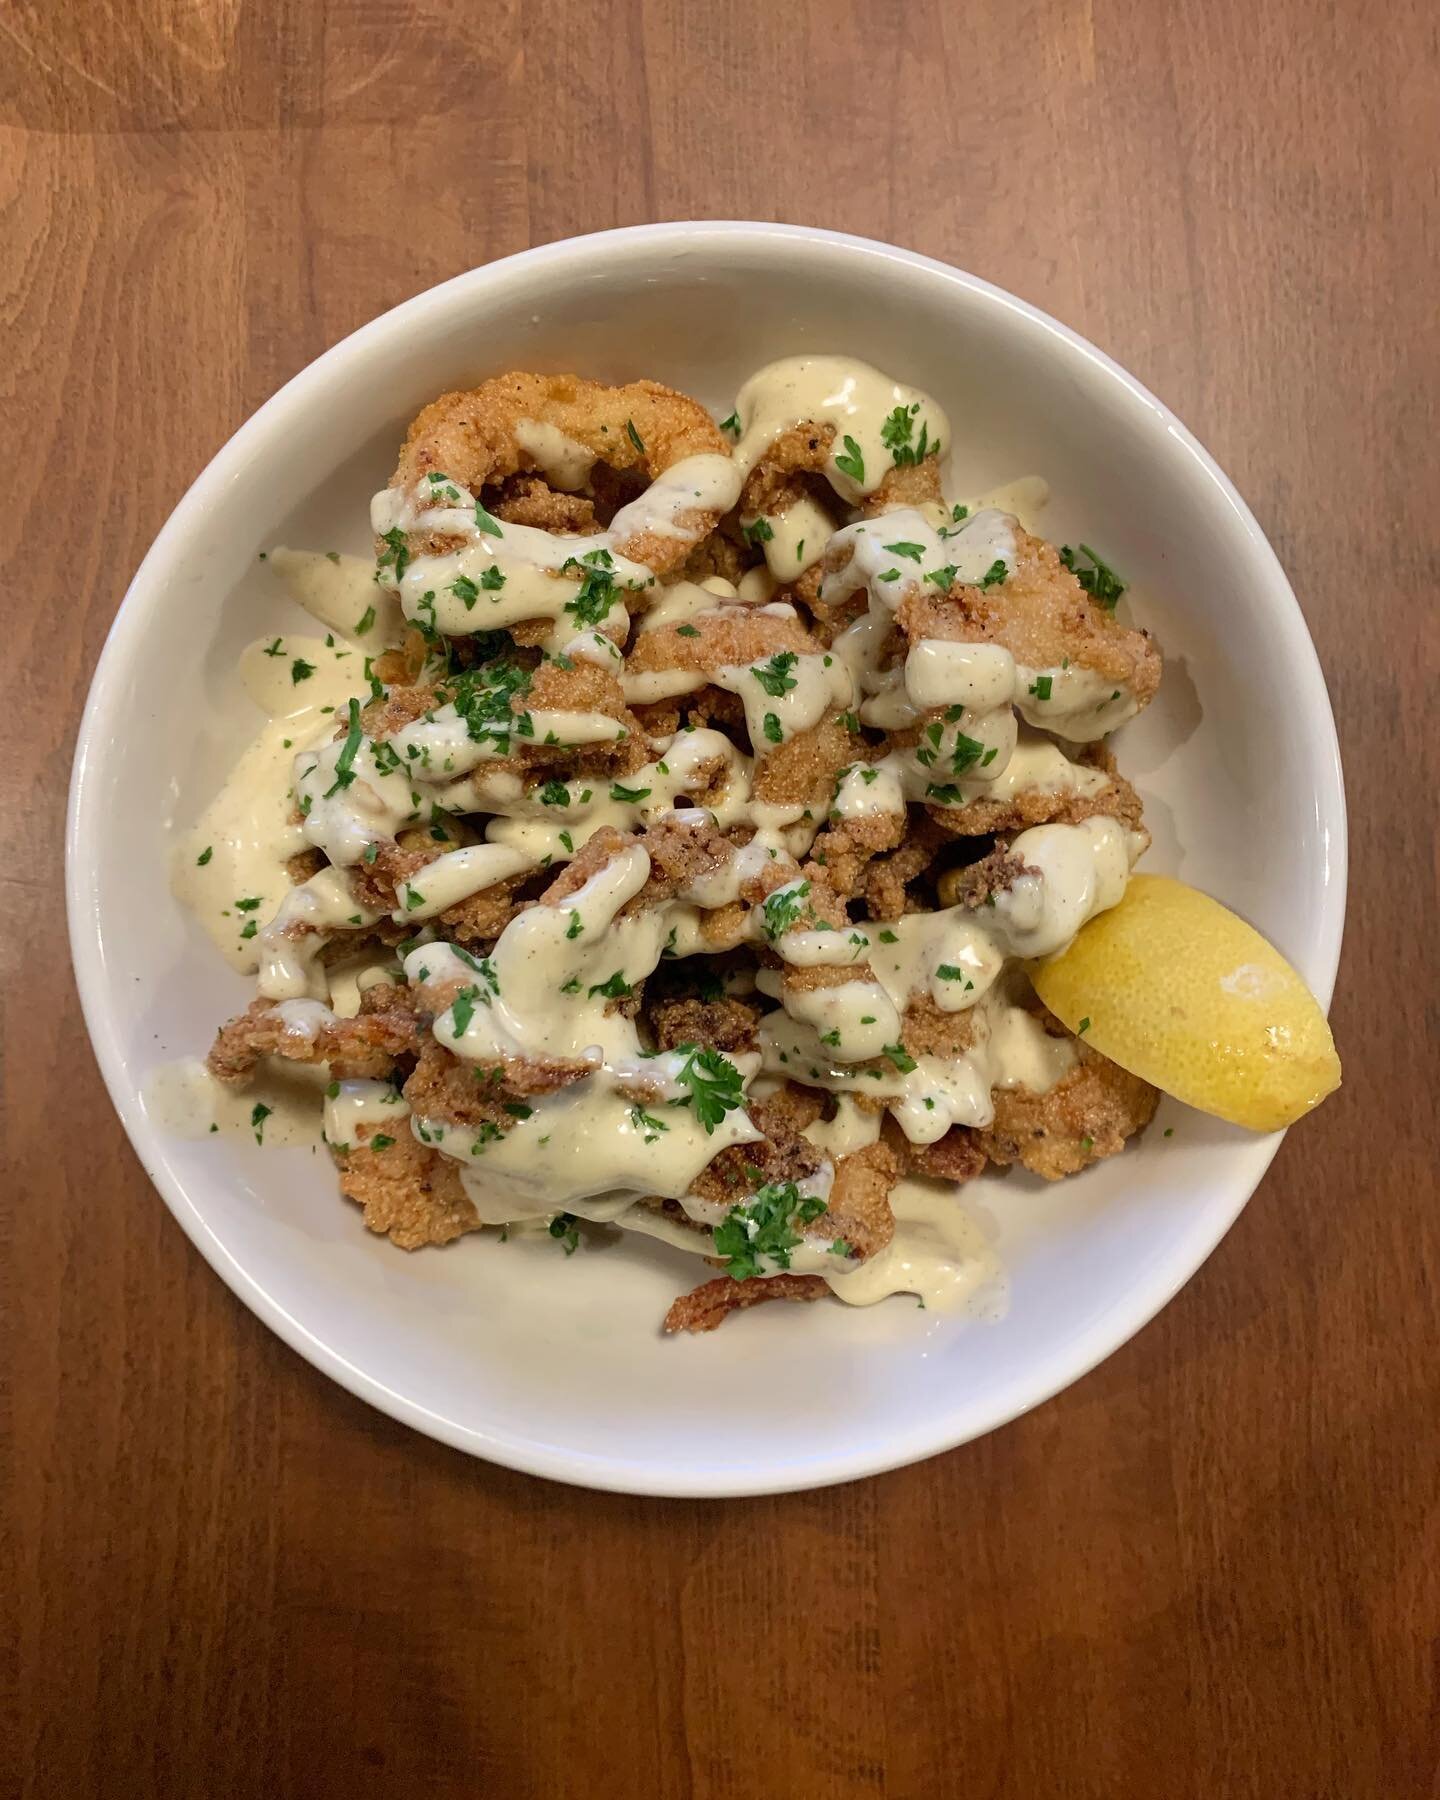 Don&rsquo;t forget to order calamari with your dollar oysters tonight.

Point Judith squid, chickpeas, piquillo peppers and roasted garlic aioli. 

#oysters #neseafood #roc